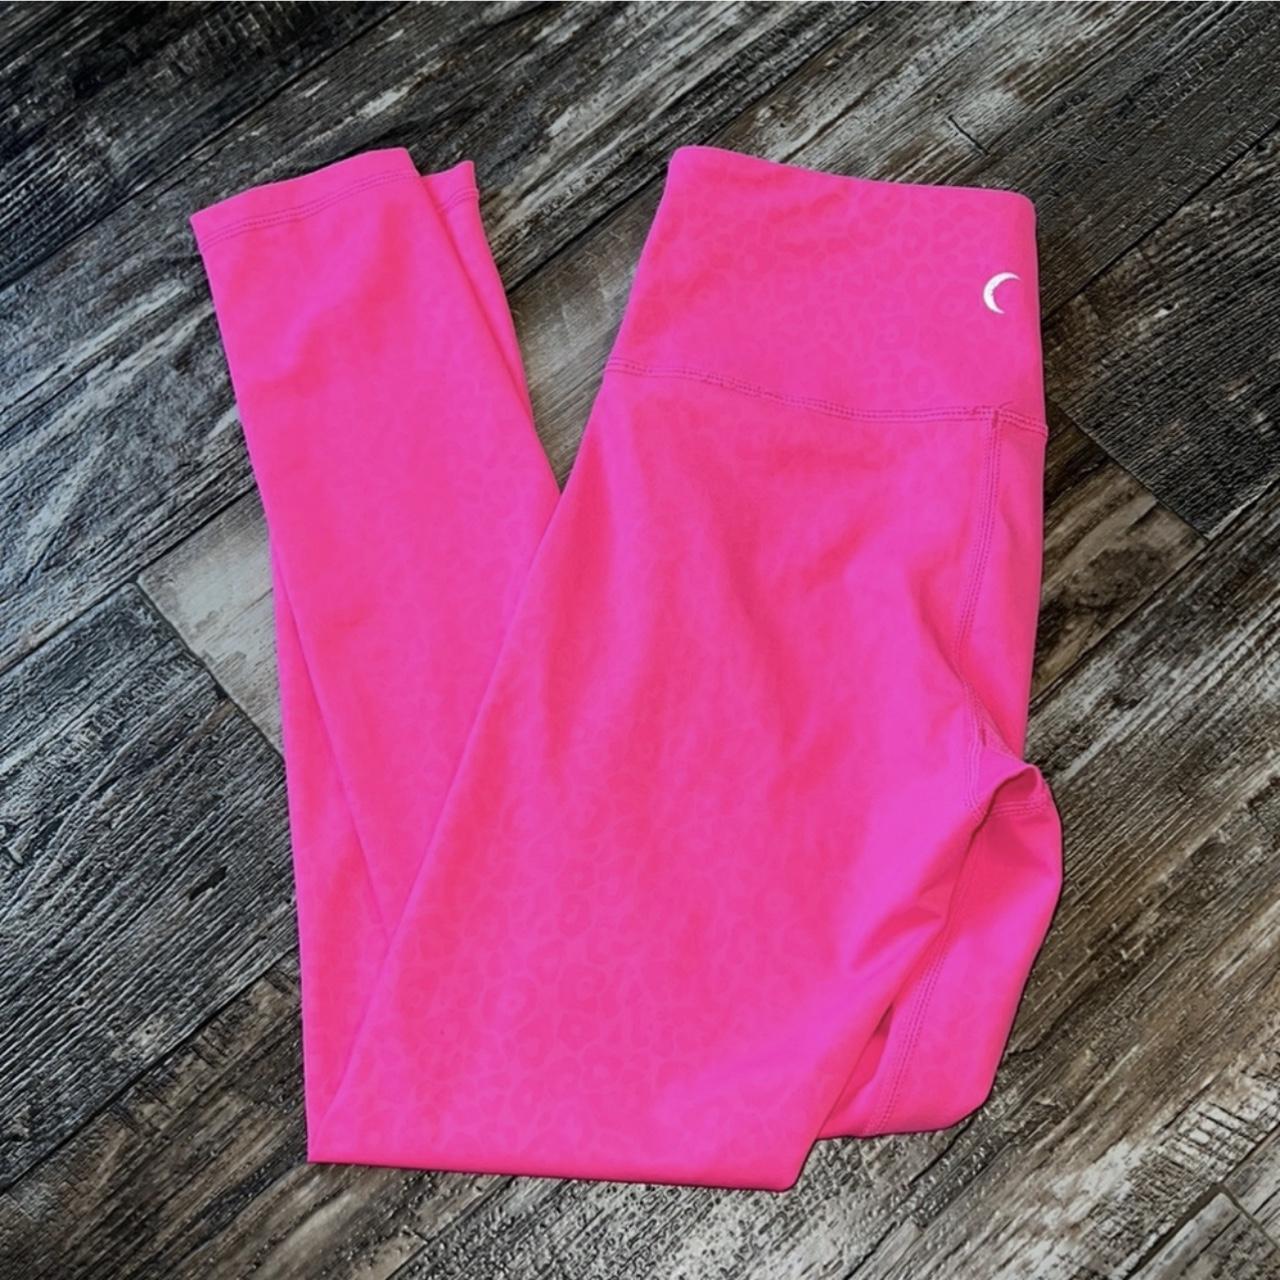 Zyia Active Hot Pink Leopard Leggings Work Out